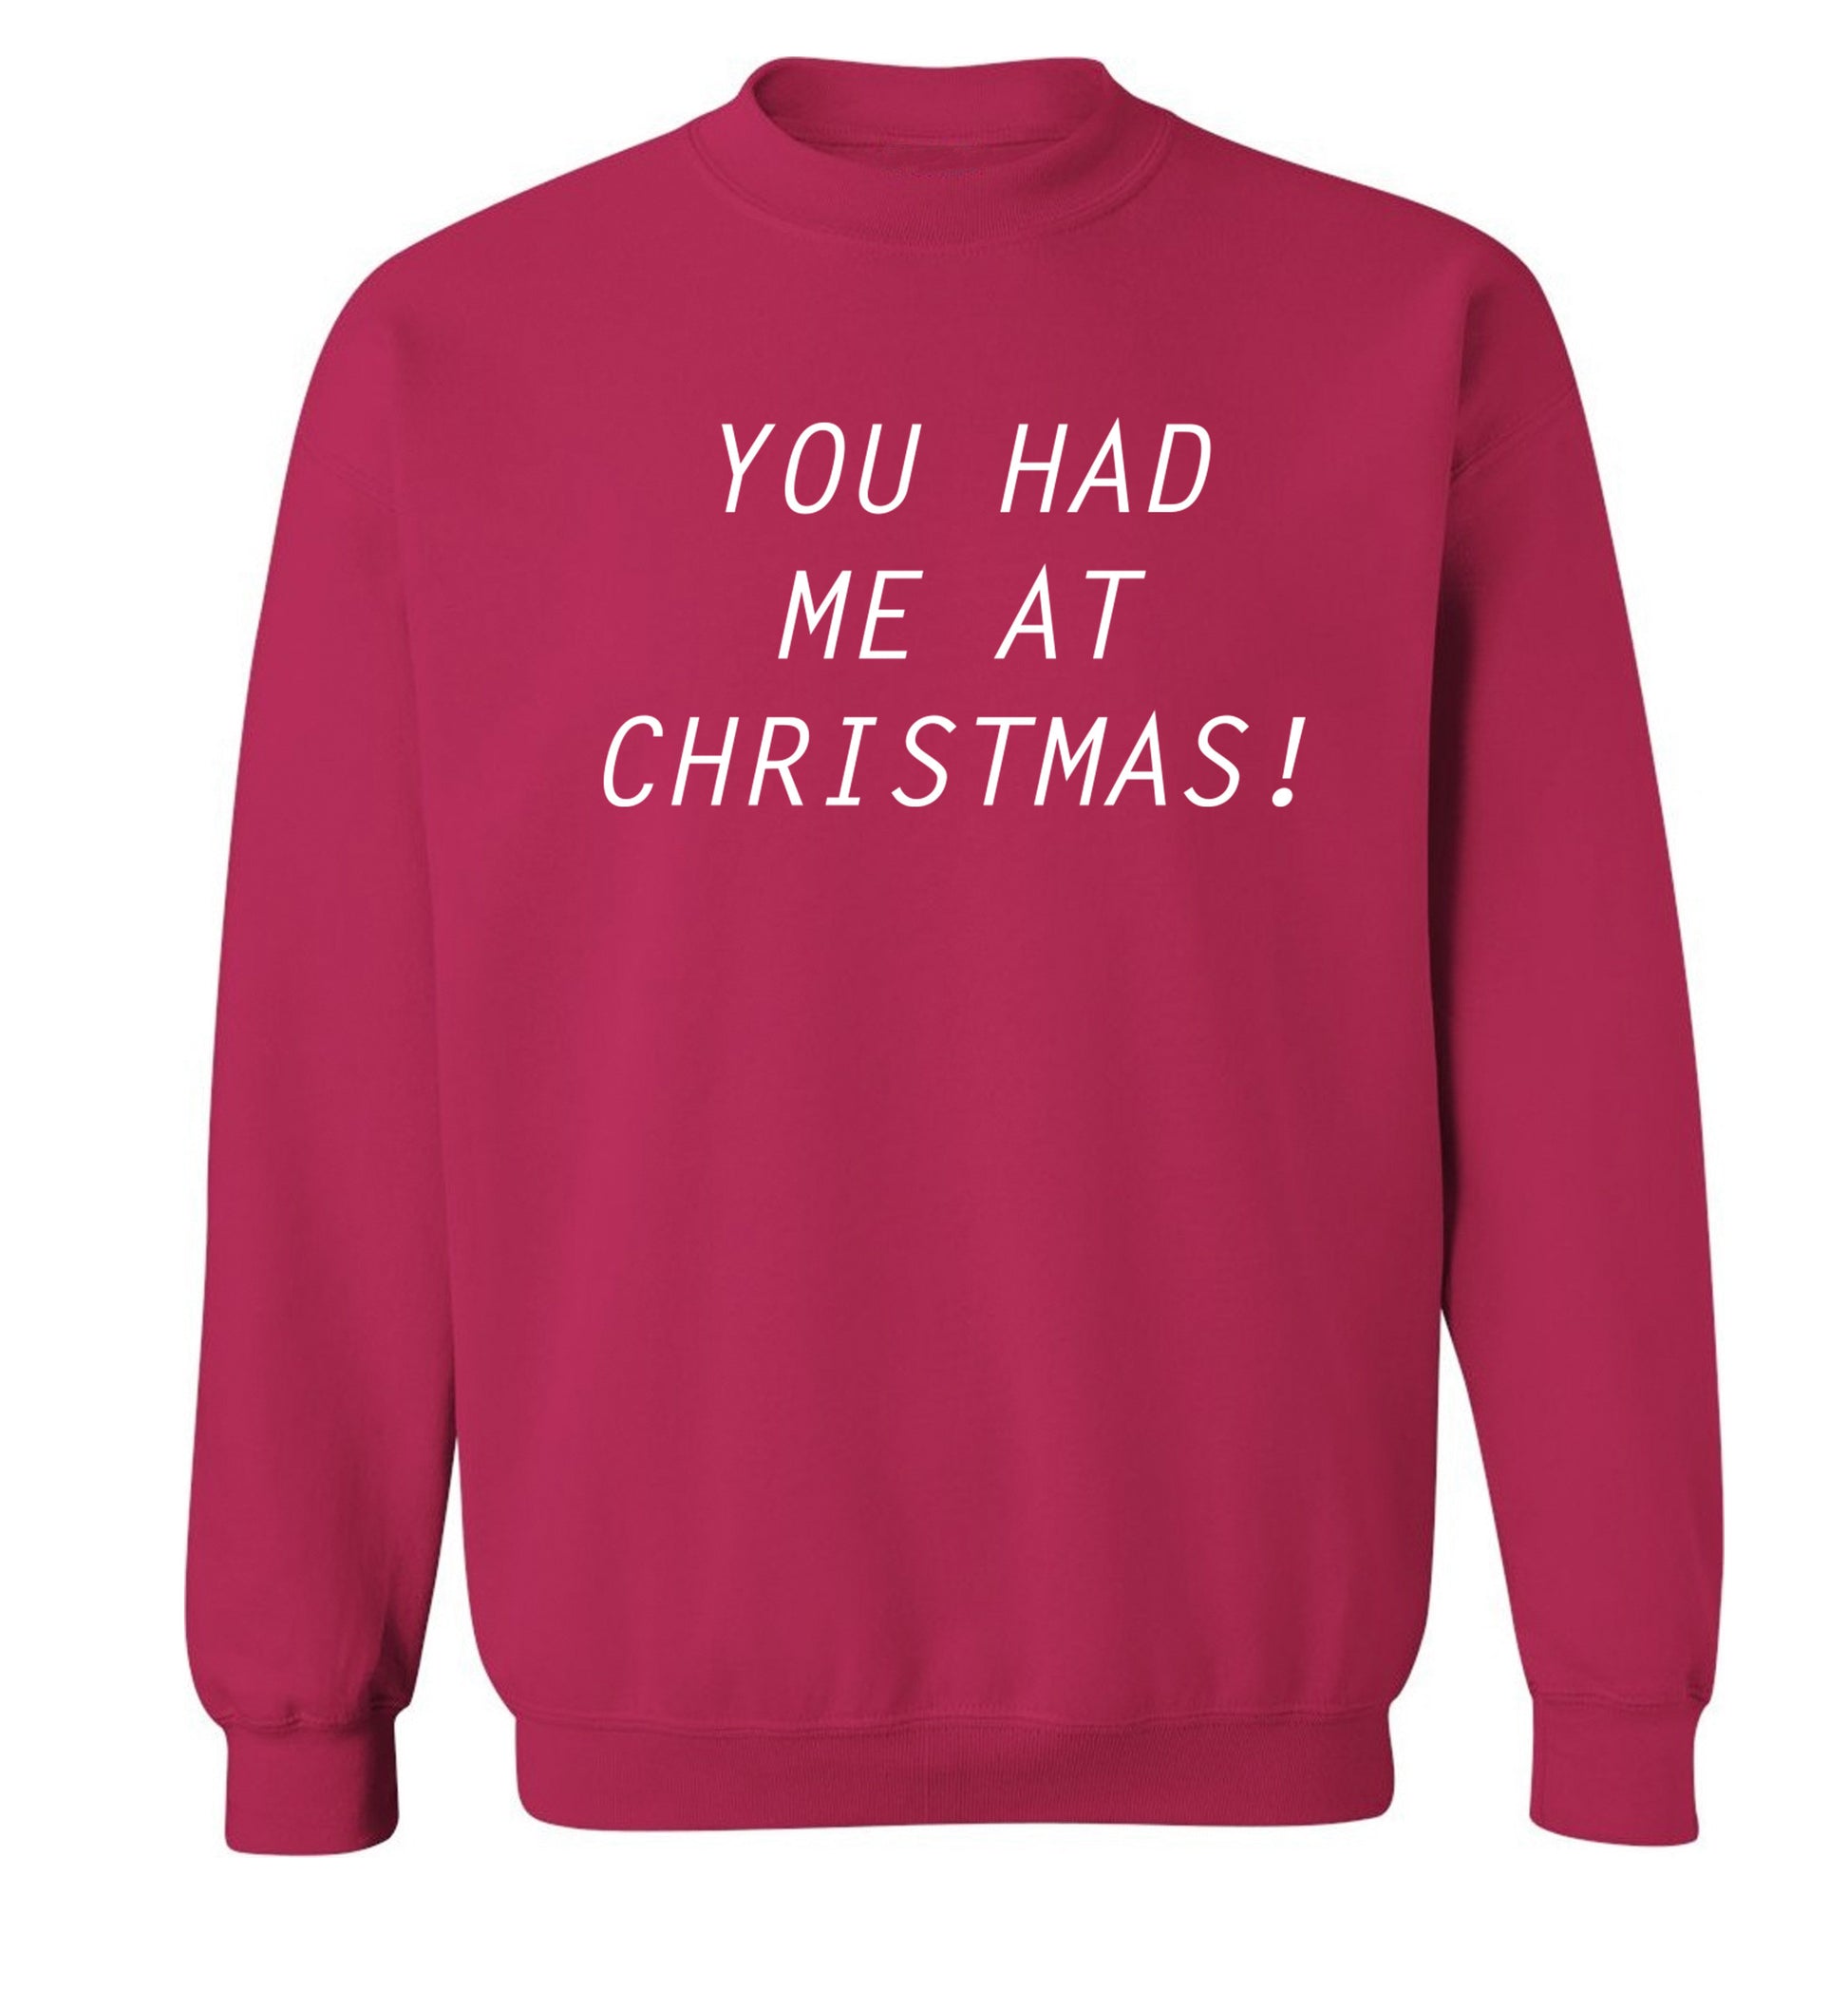 You had me at Christmas Adult's unisex pink Sweater 2XL